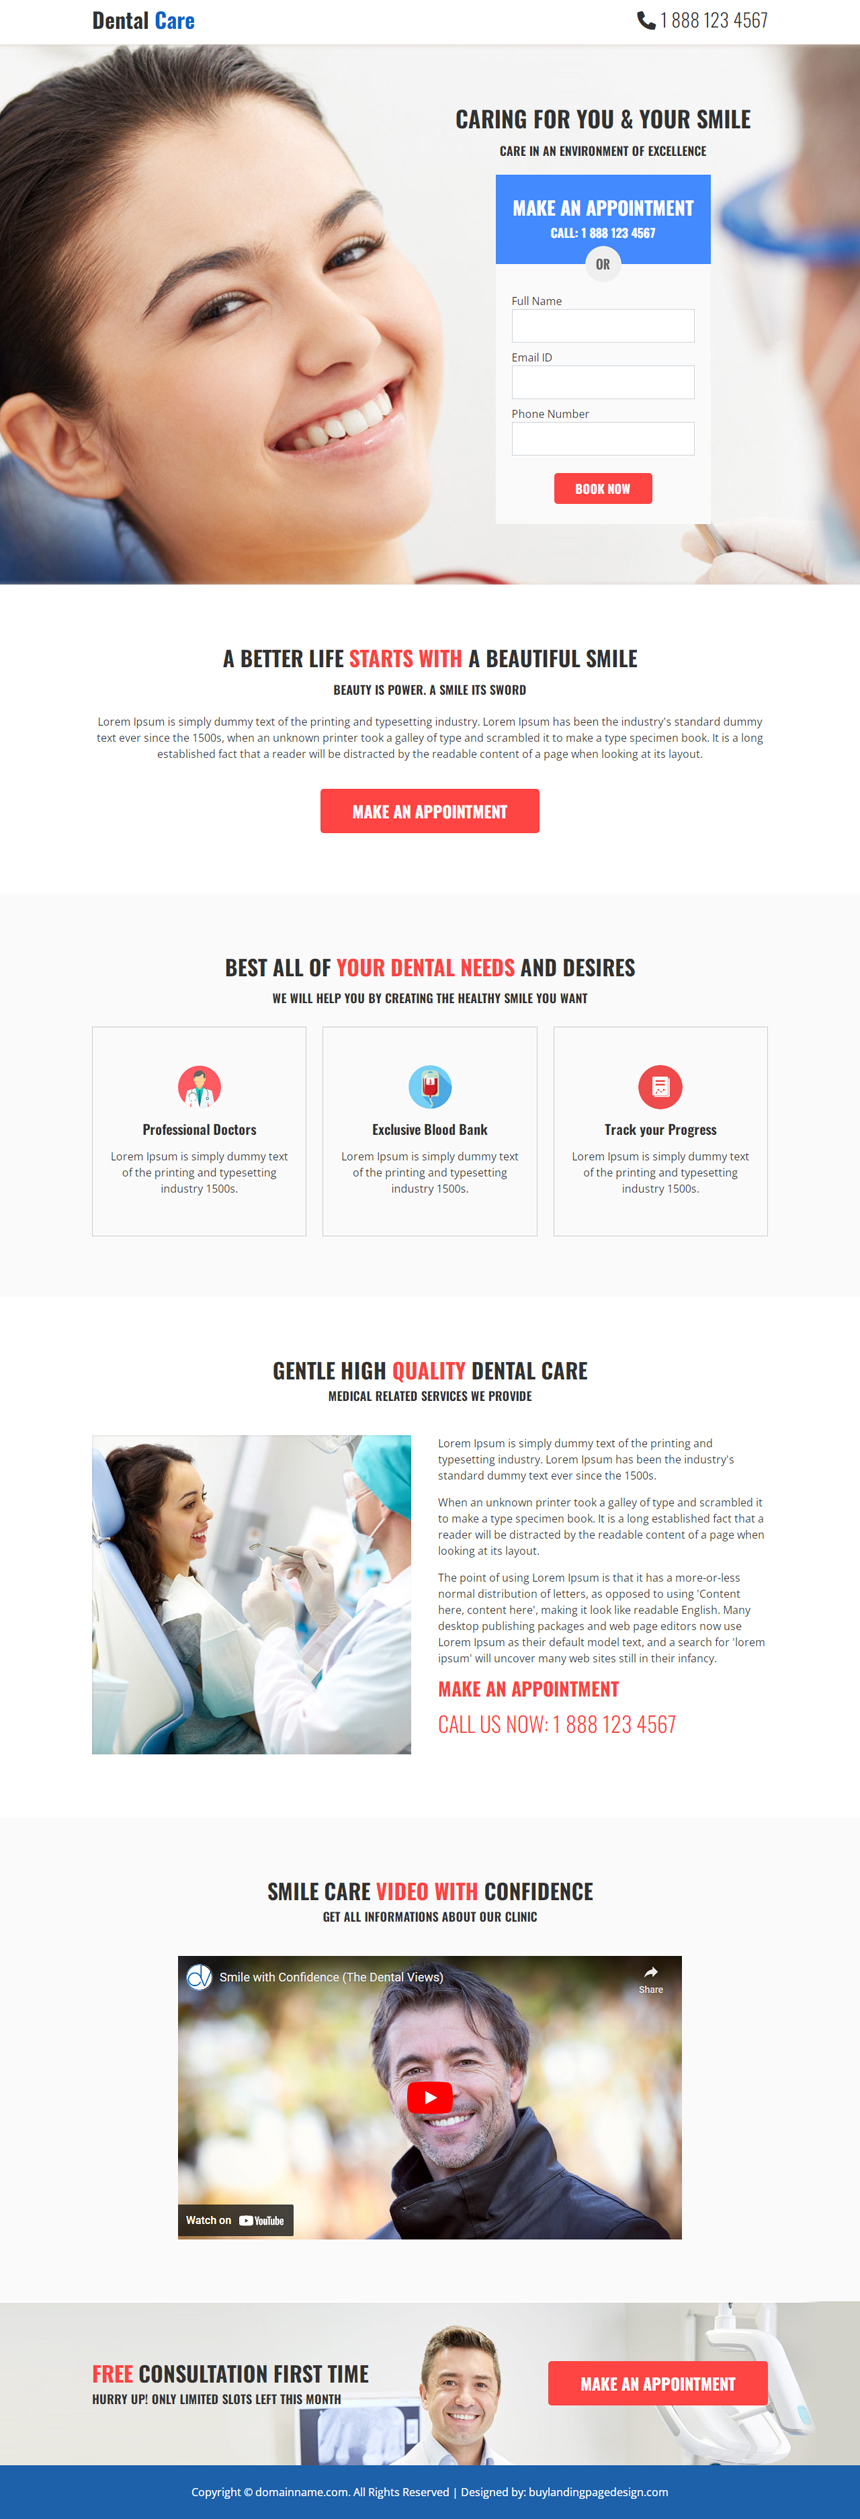 dental care clinic responsive landing page